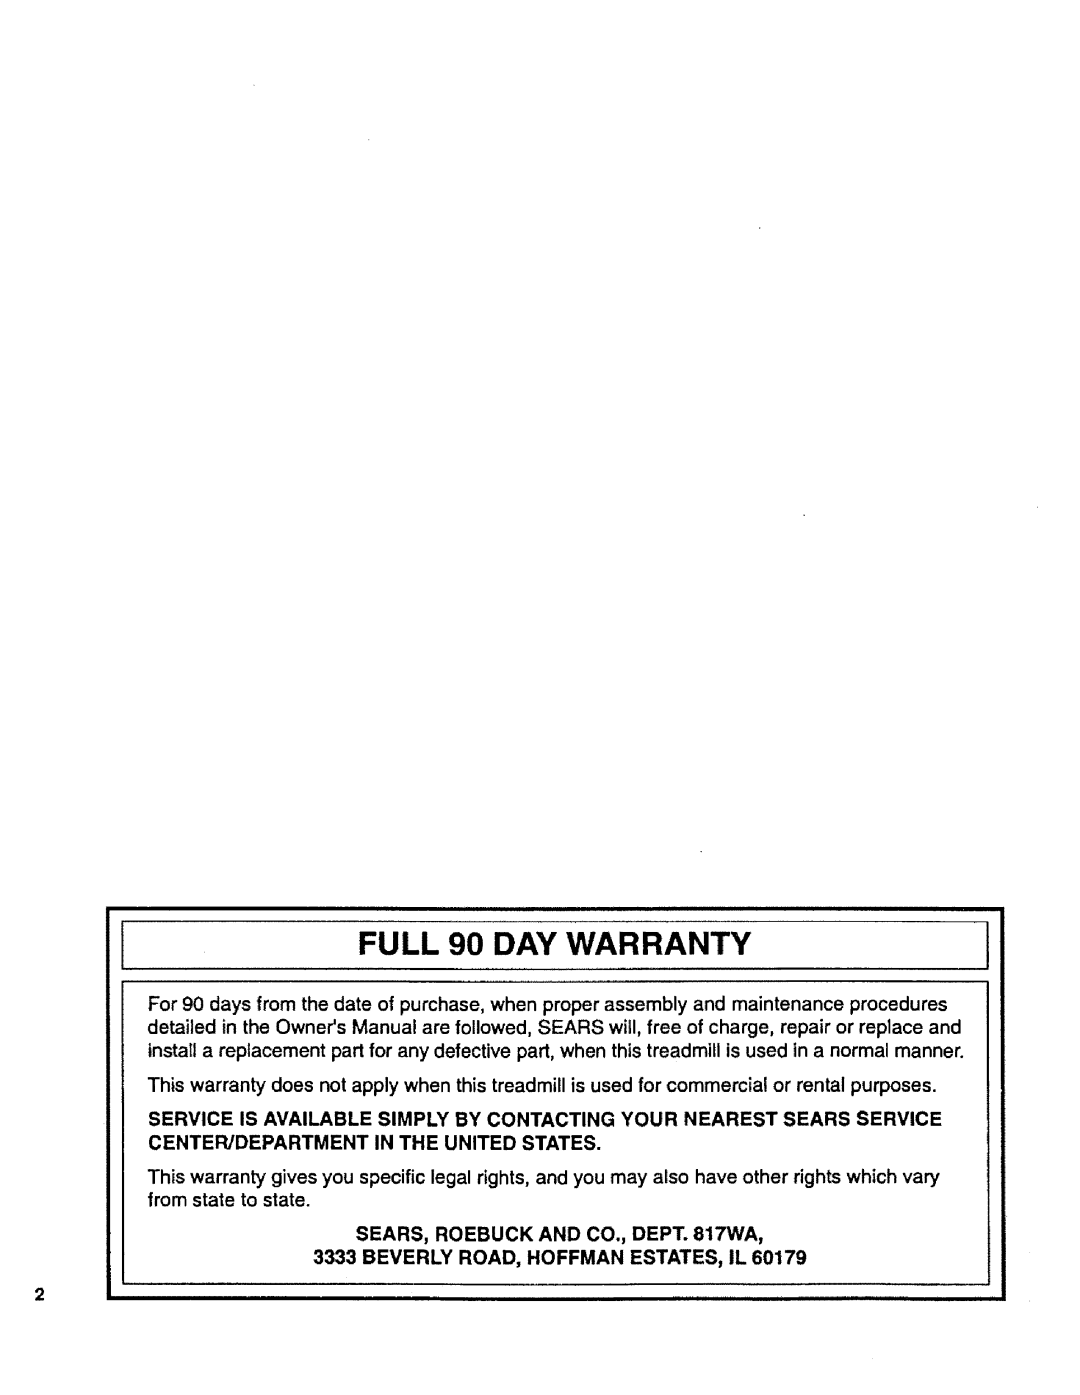 Sears 831.29725 owner manual FULL 90 DAY WARRANTY, Service Is Available Simply By Contacting Your Nearest Sears Service 